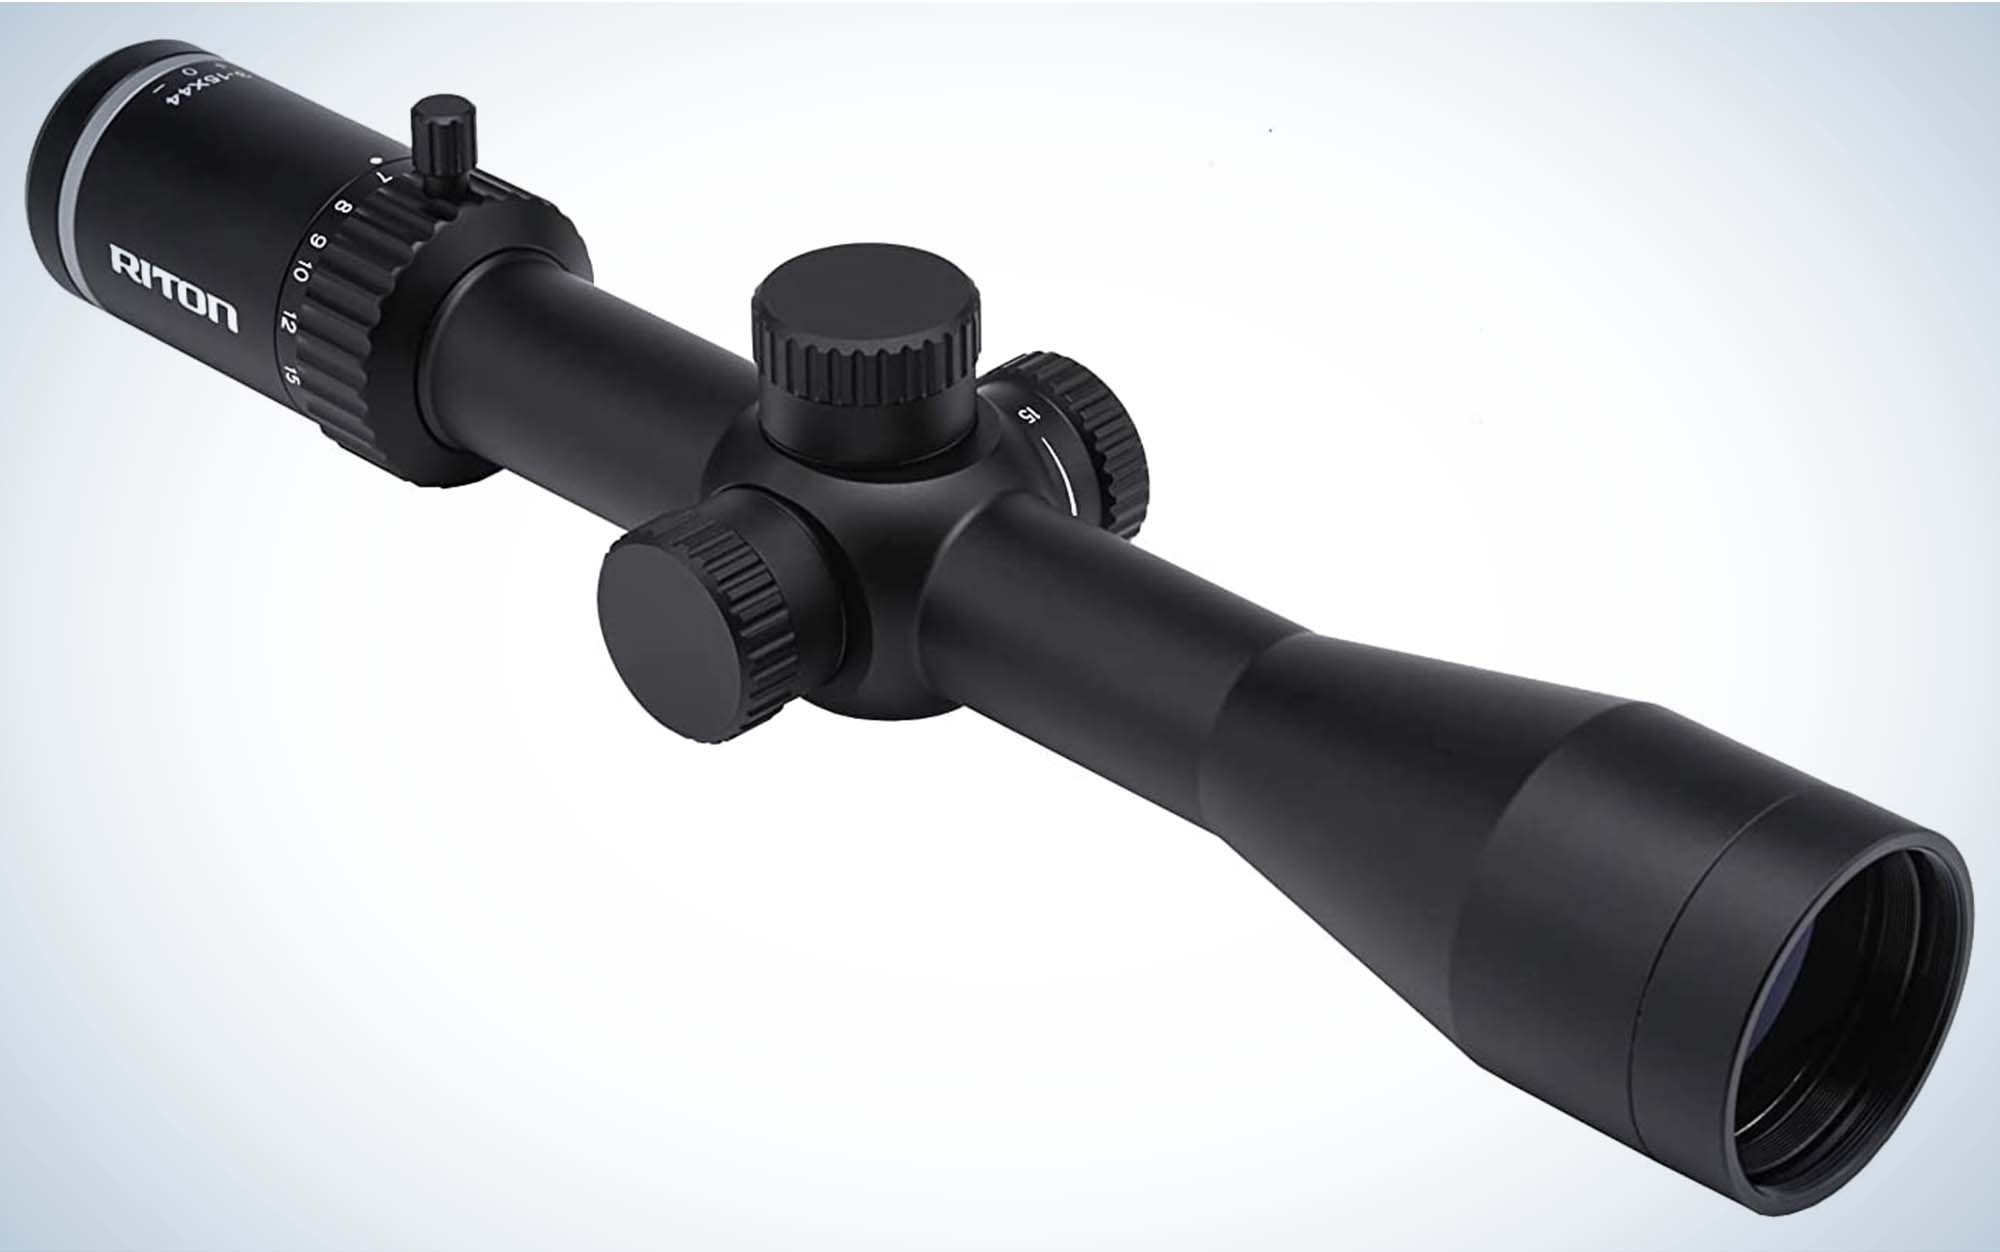 The Riton X3 Primal 3-15x44 is the most versatile rifle scope.